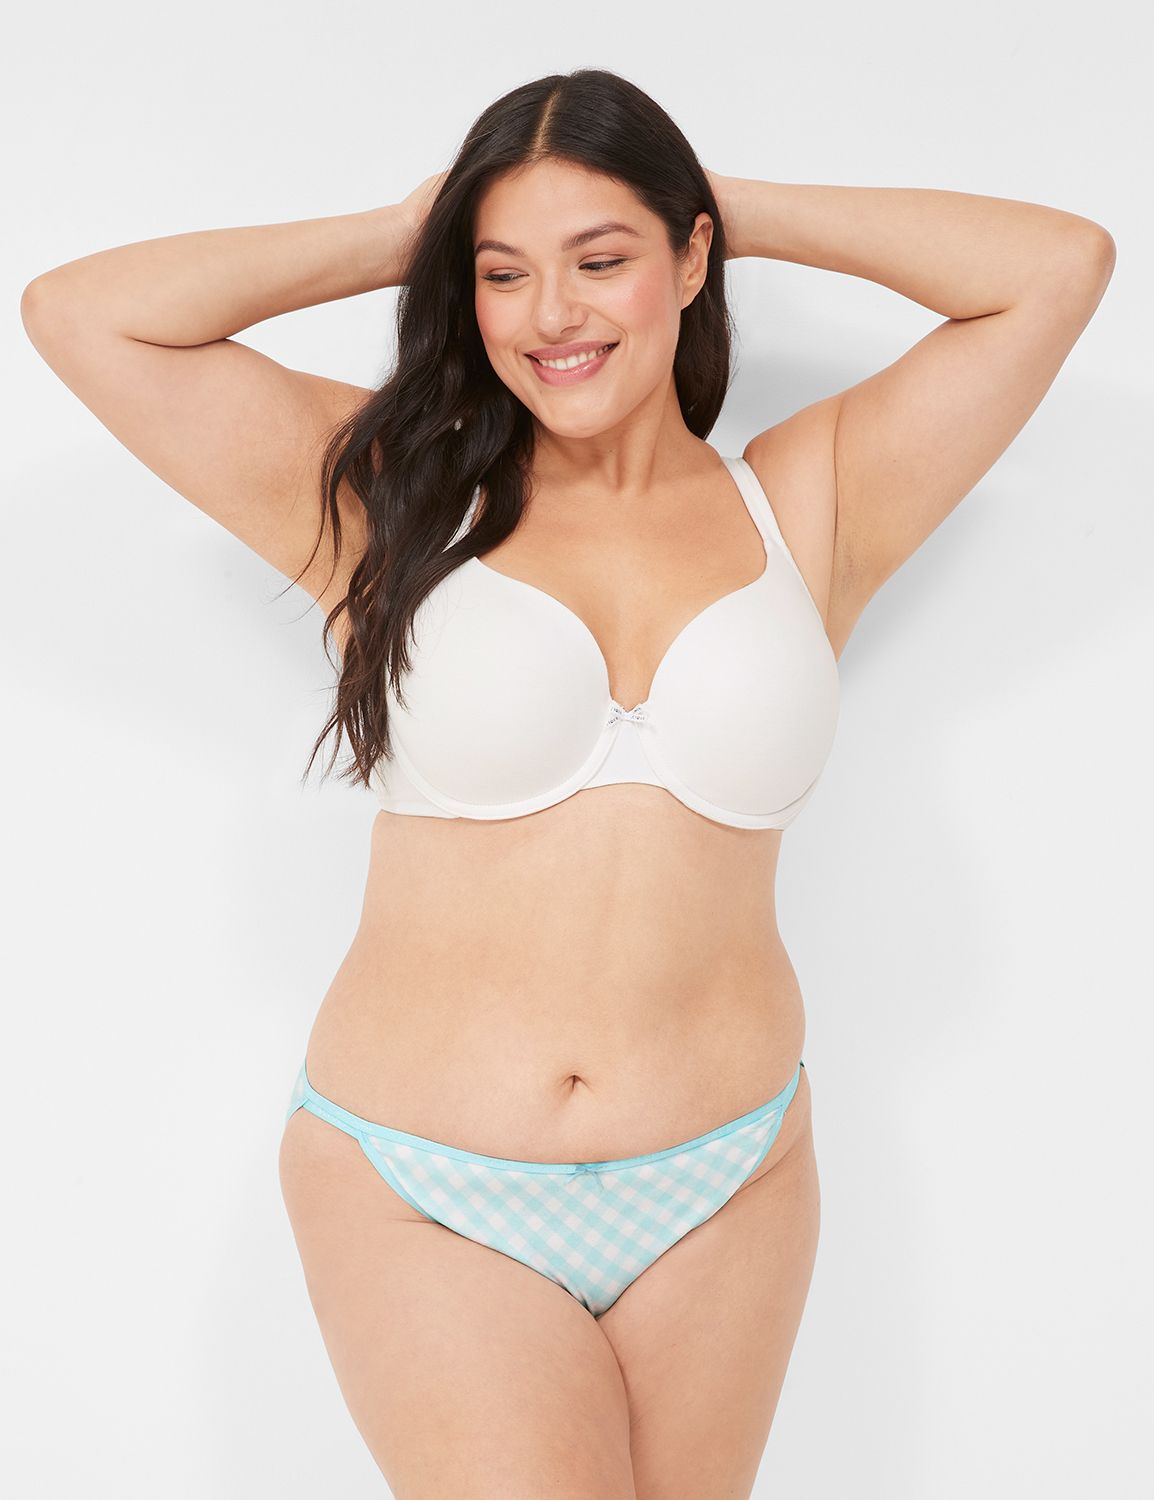 Stylish and Comfortable Plus Size Bra's from Cacique » The Denver